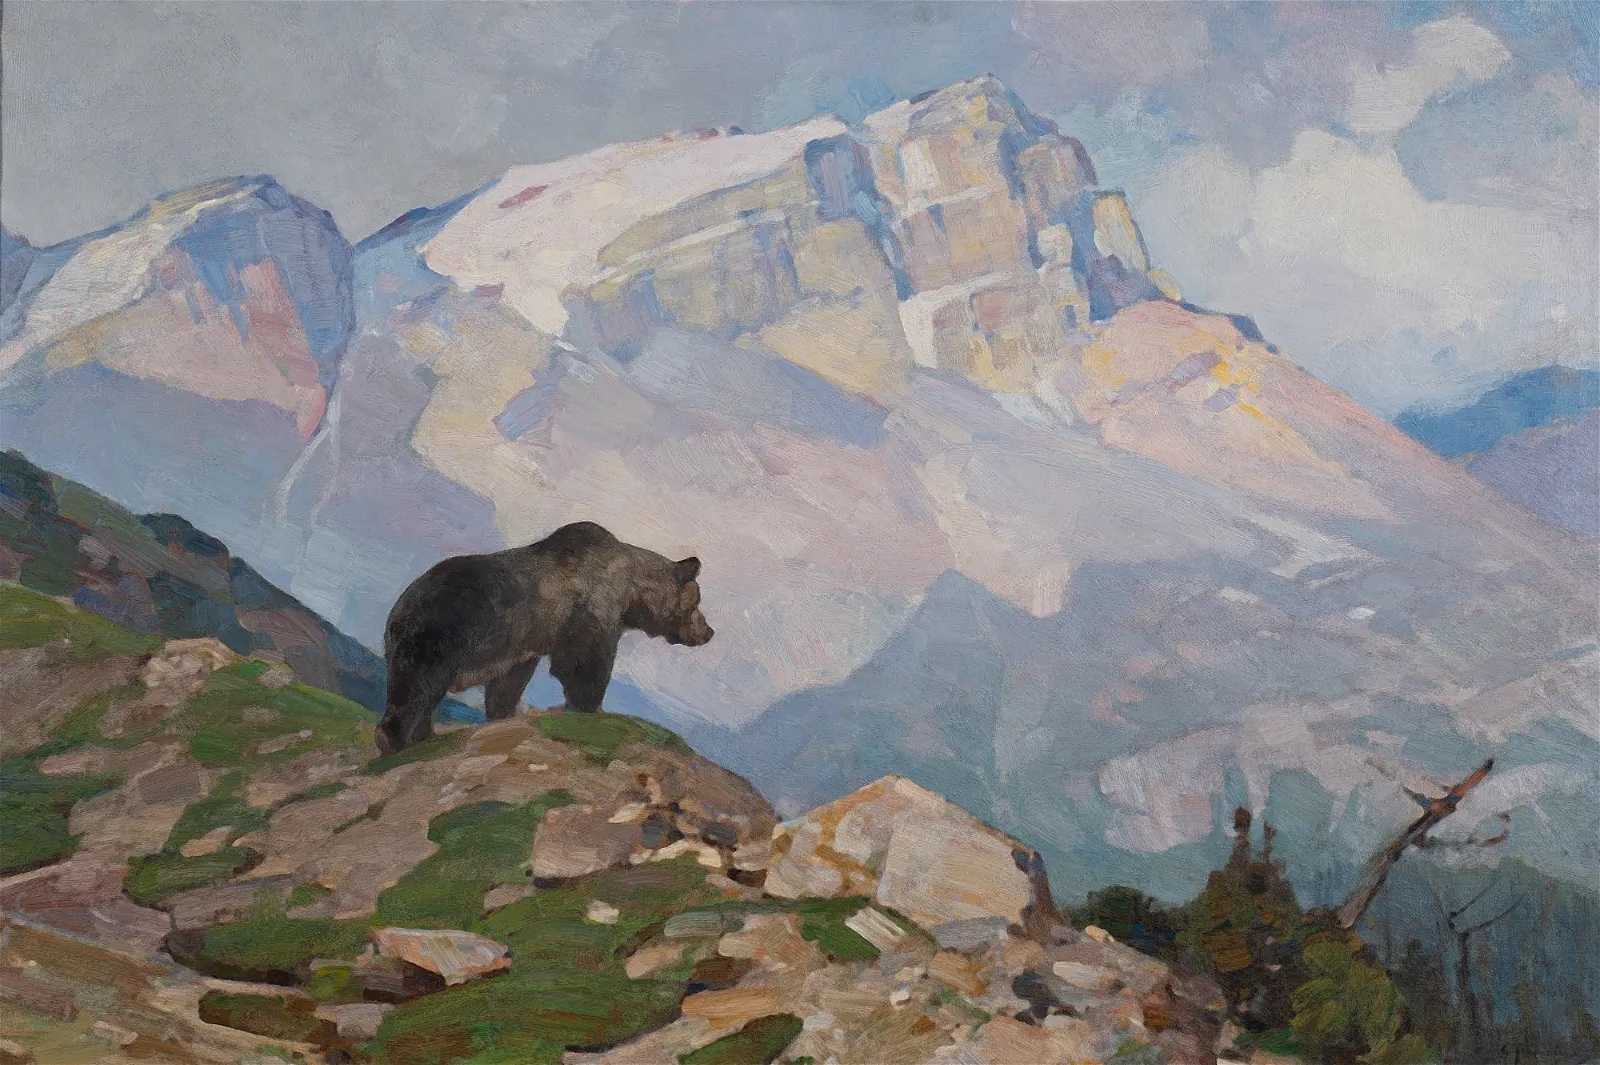 Carl Rungius, ‘The Old Man of the Mountains,’ estimated at $120,000-$180,000 at Doyle New York May 15.